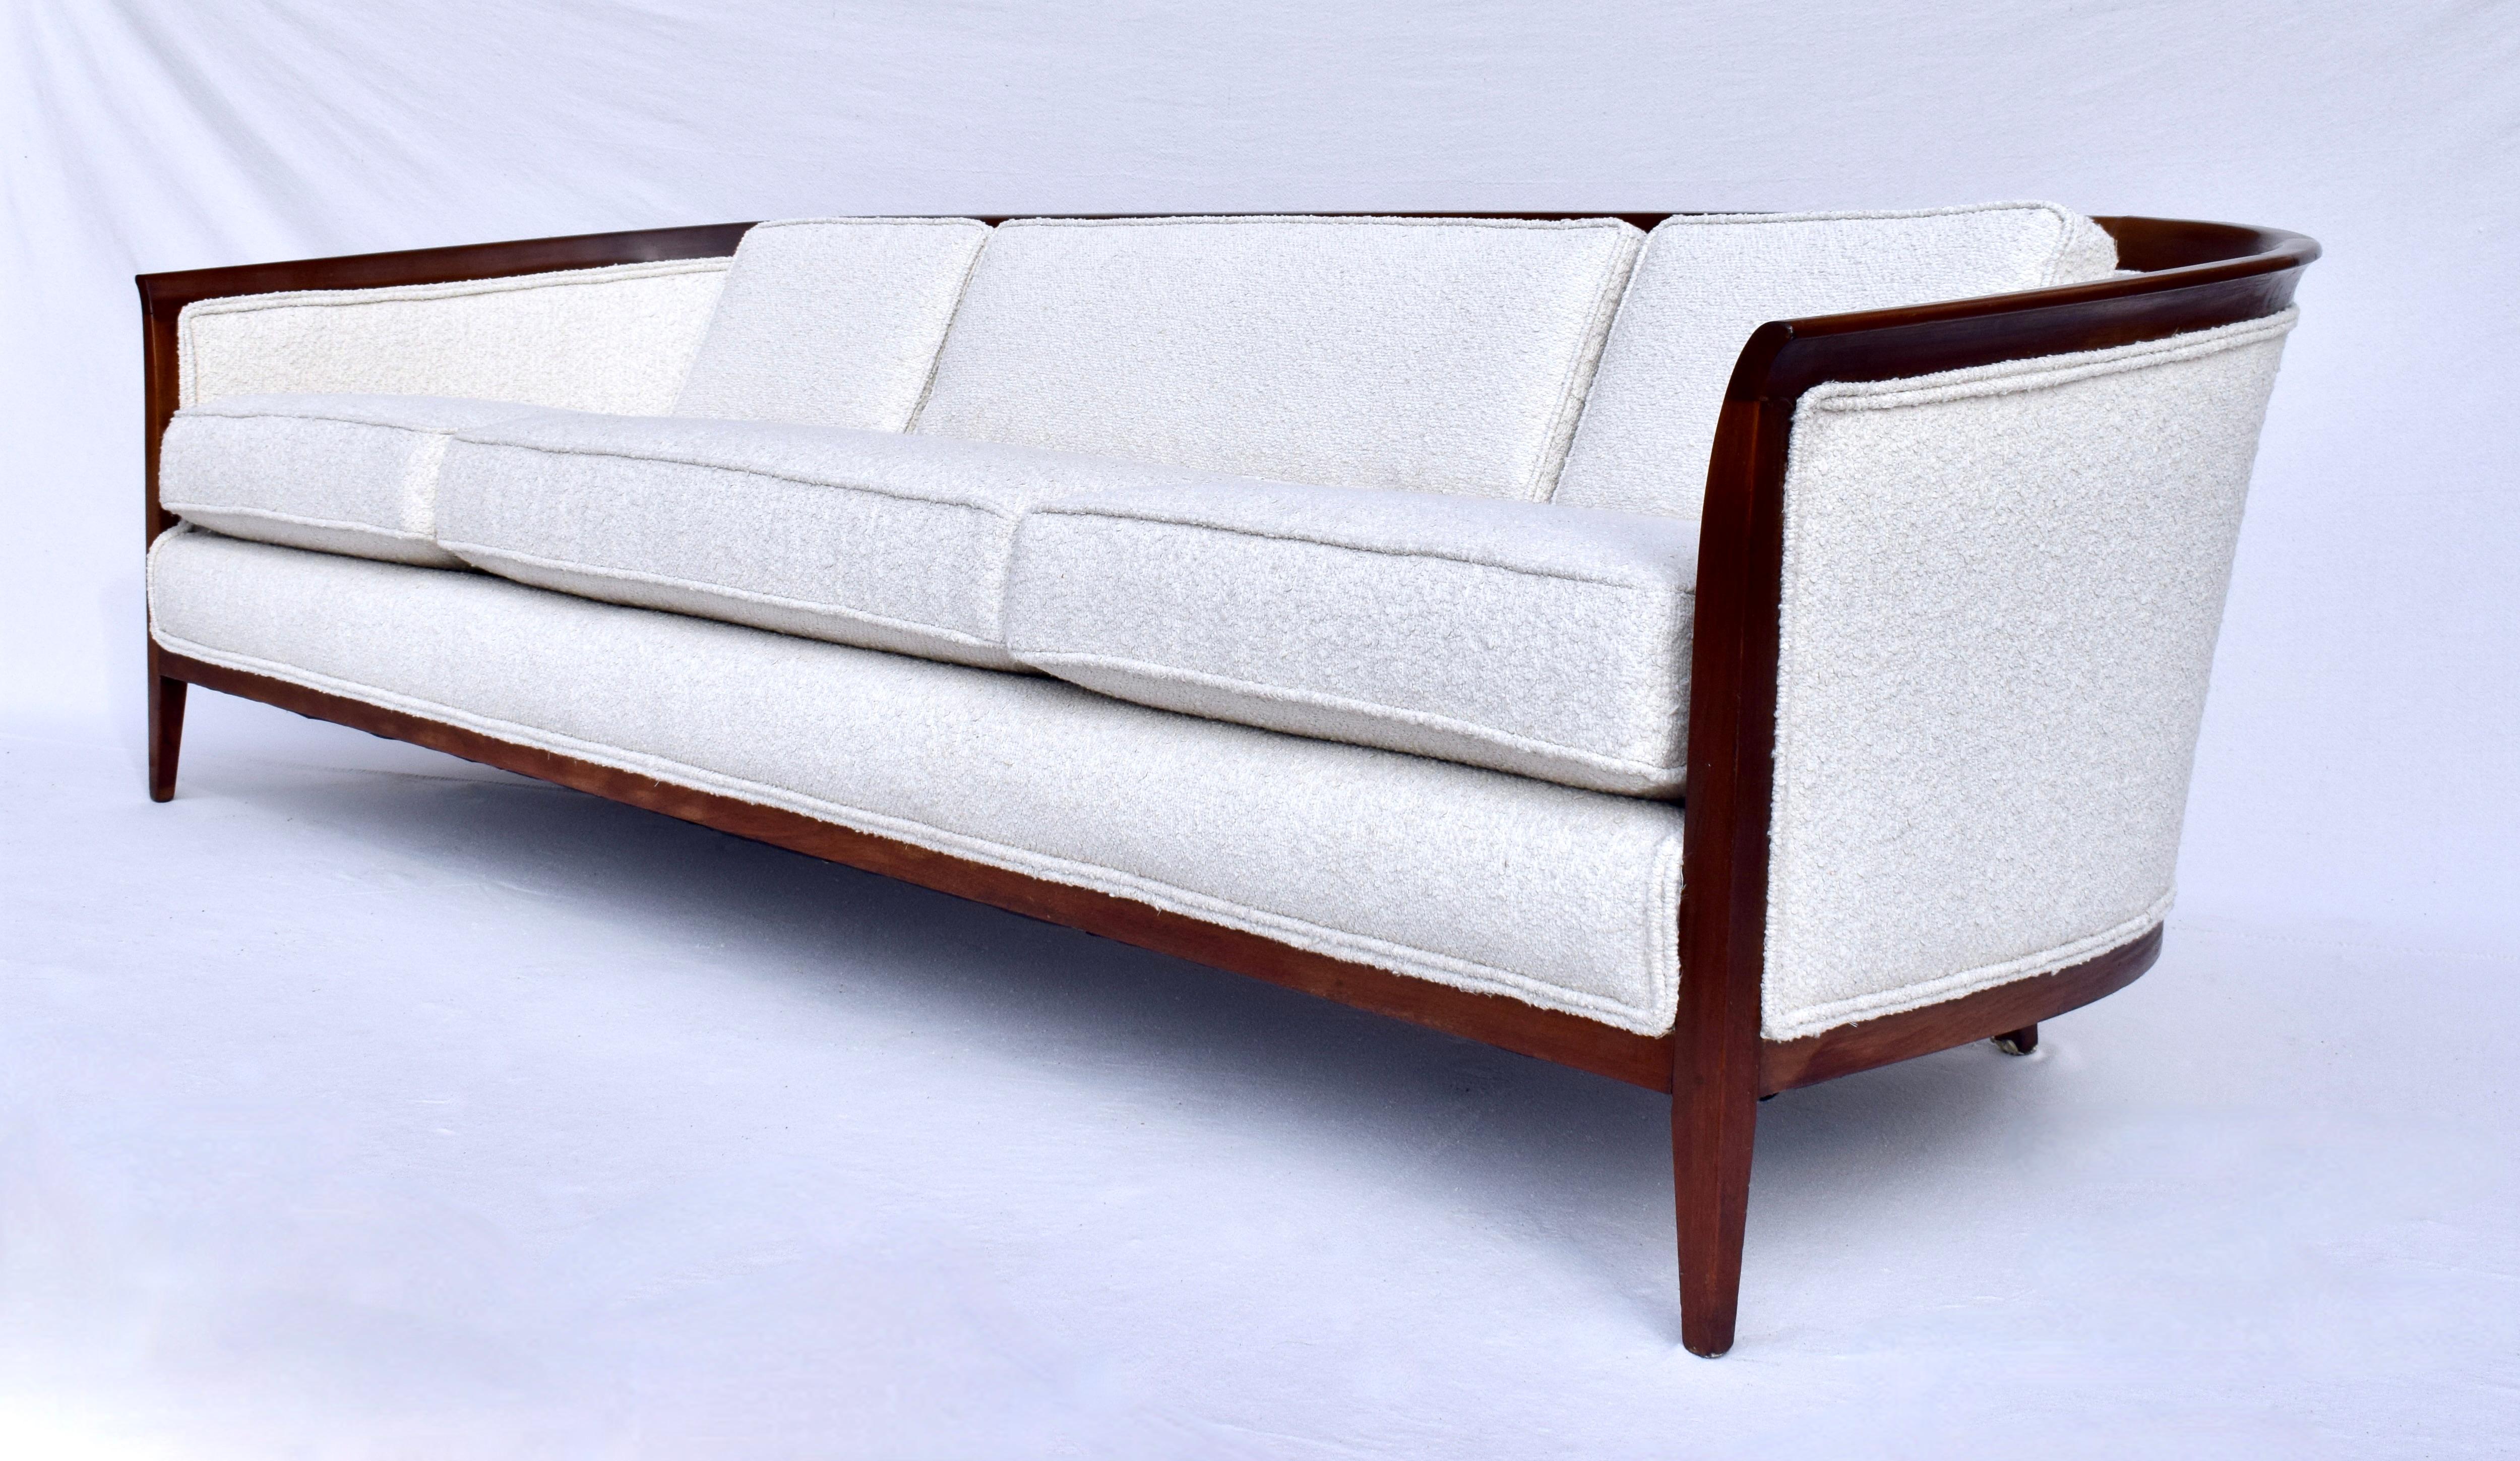 Sculpted Walnut Sofa by Erwin Lambeth In Good Condition For Sale In Southampton, NJ